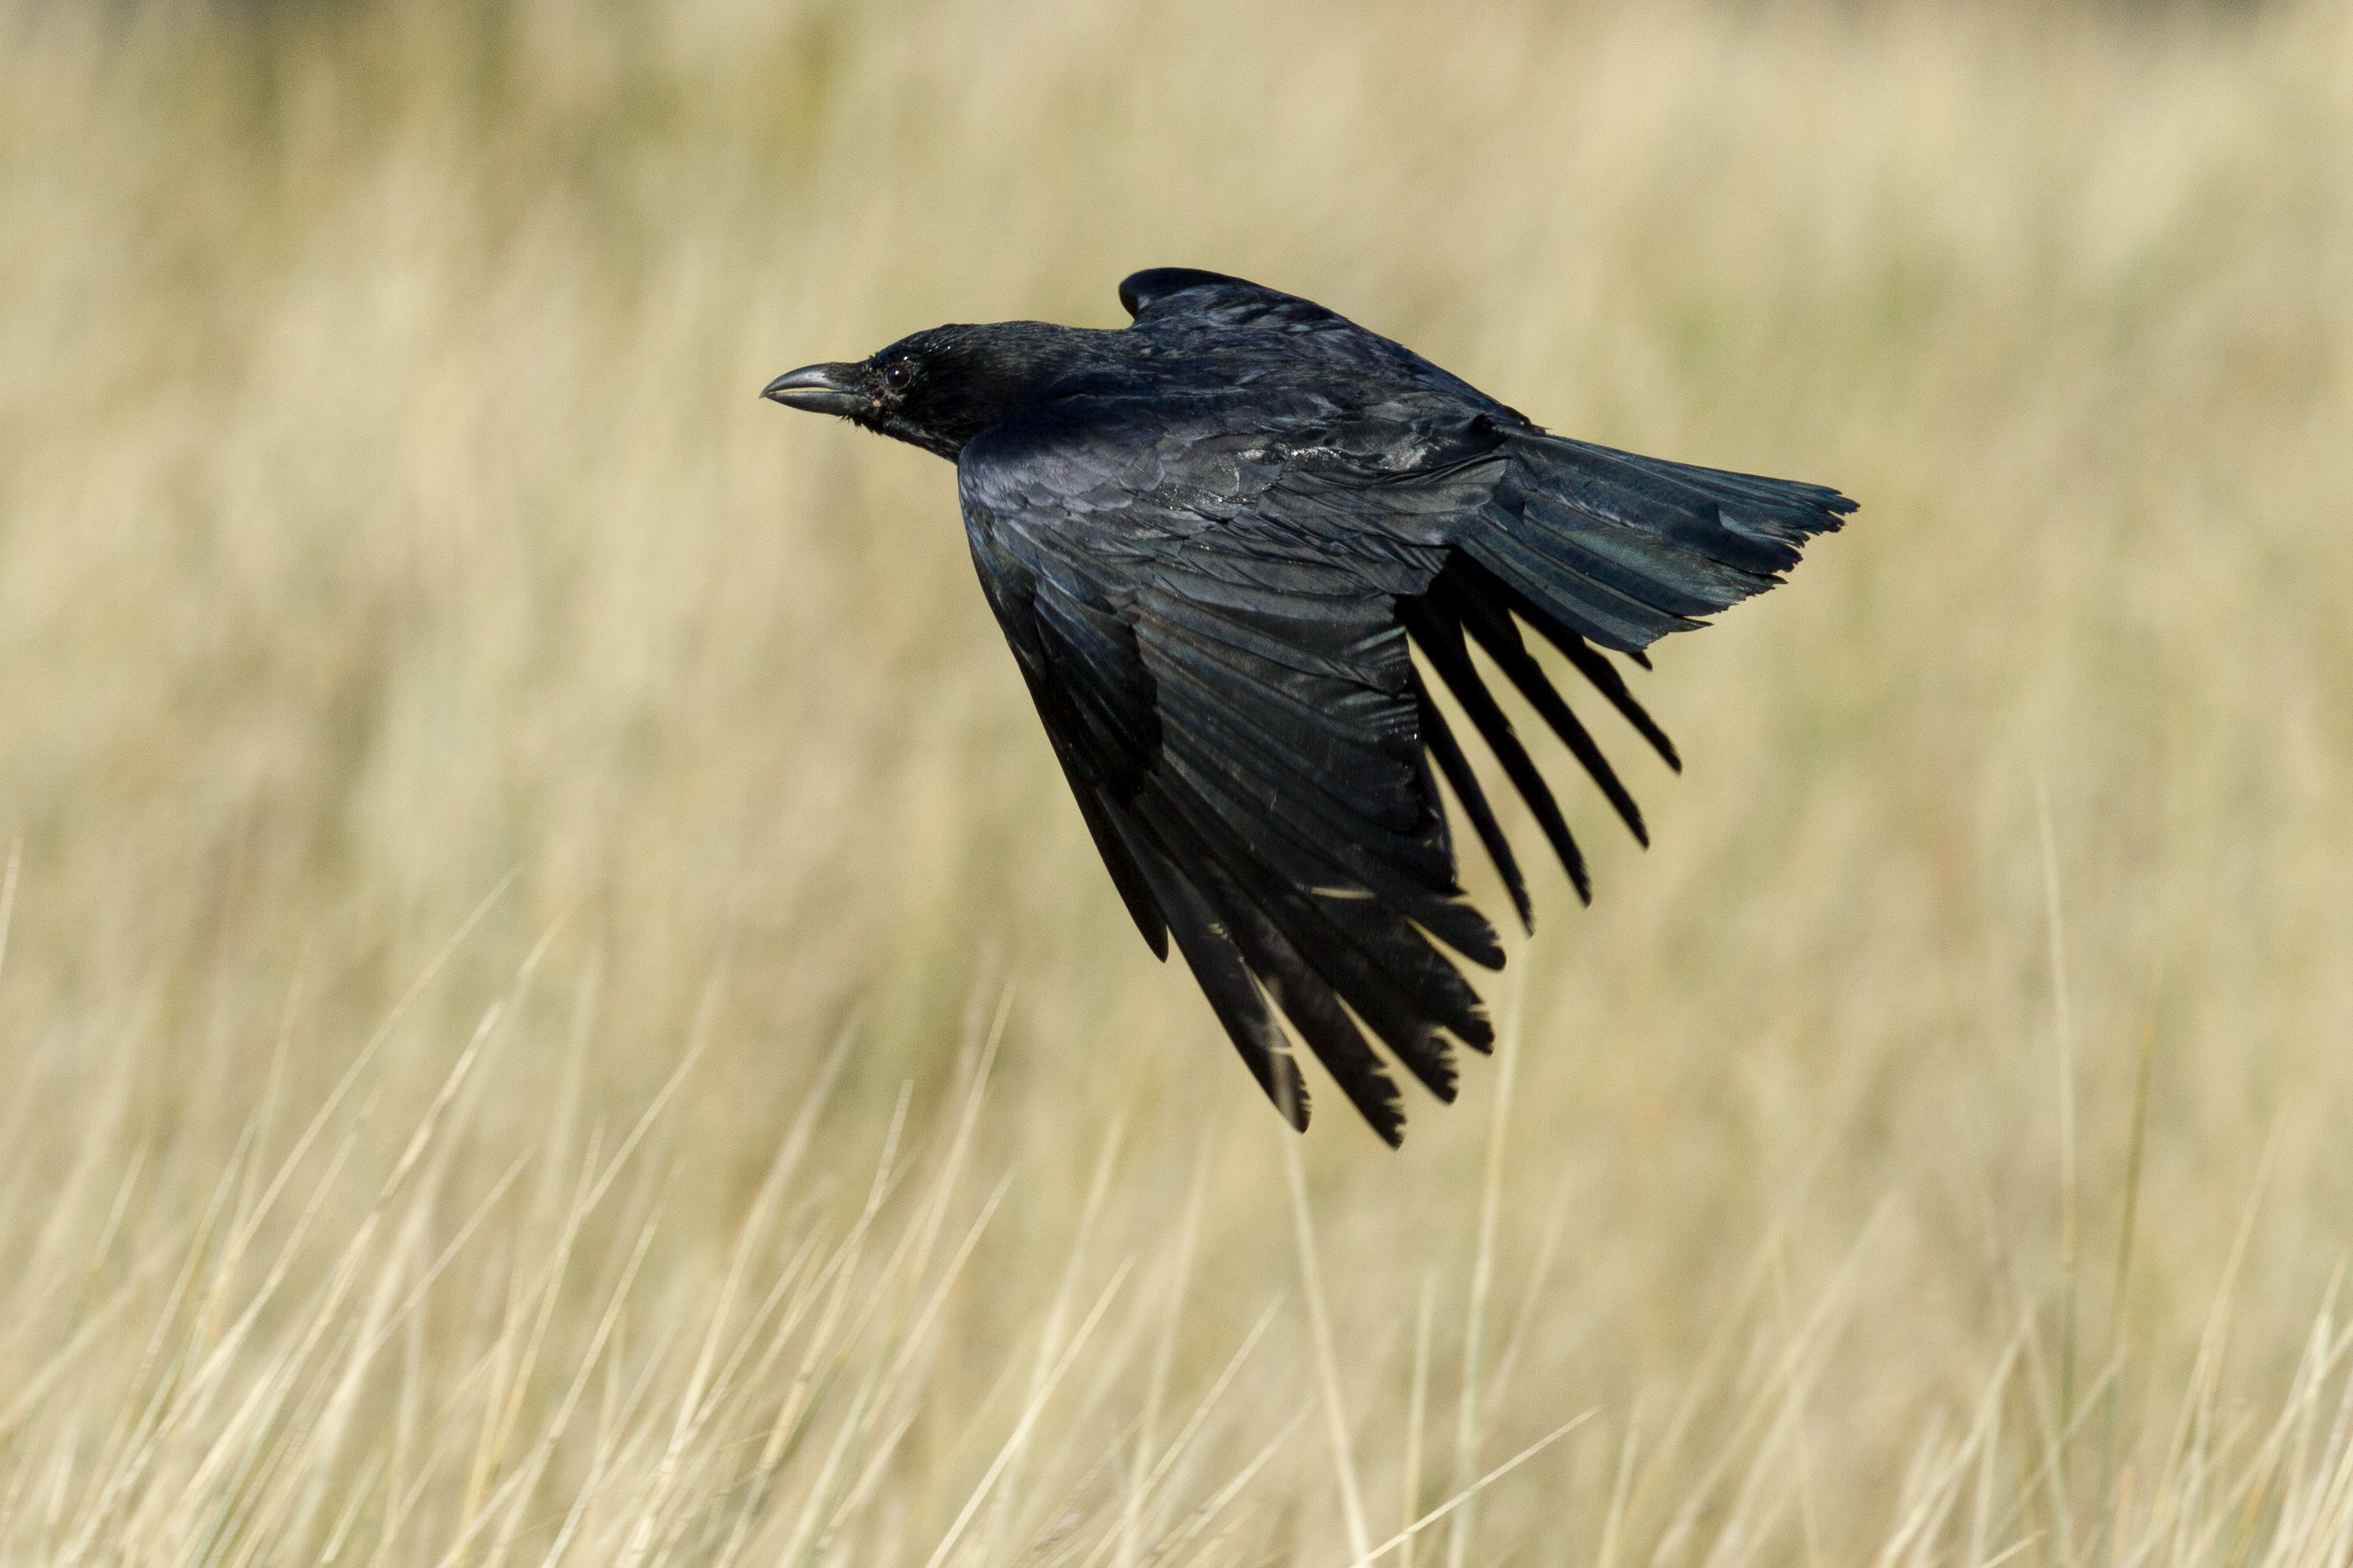 Common Raven in Jersey